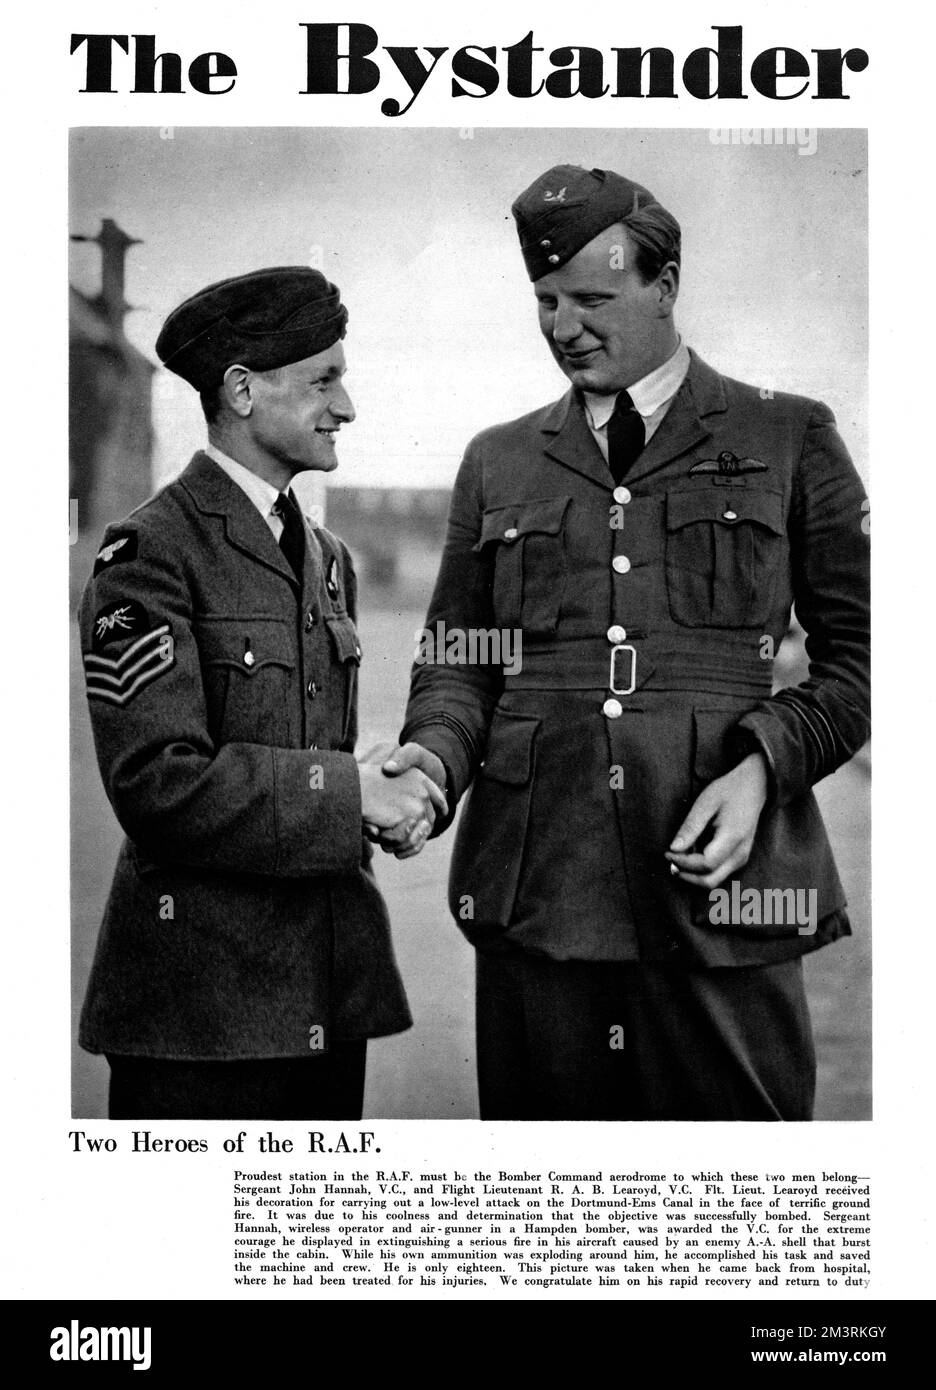 The front cover of The Bystander features John Hannah and Roderick Learoyd, two R.A.F. pilots who recently received the Victoria Cross. Hannah's V.C. was given to him for extinguishing a fire on board his aircraft while under bombardment from A.A. guns, while Learoyd earned his for a daring bombing raid on the Dortmund-Ems Canal.  1940 Stock Photo